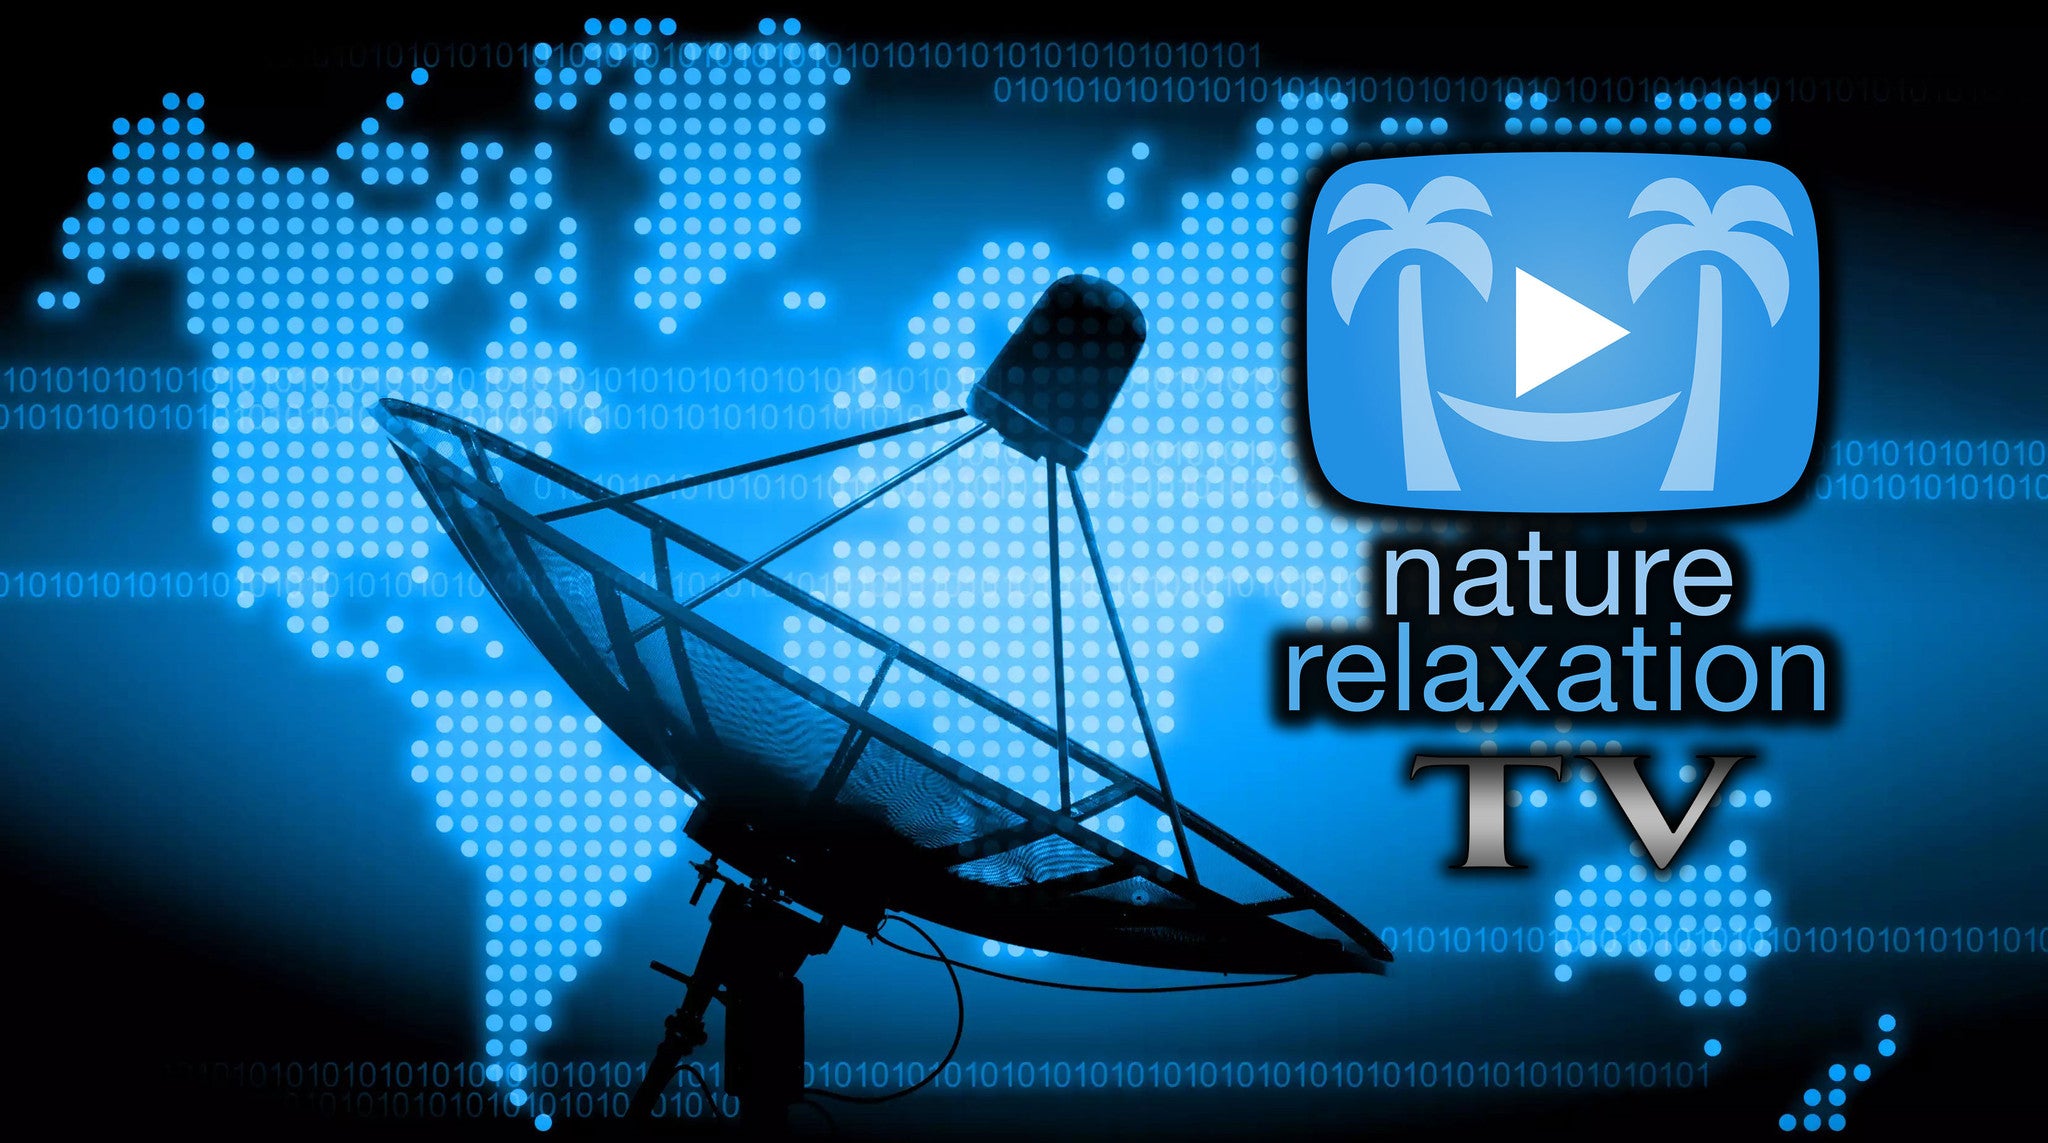 SES and Nature Relaxation Announce New 4K UHD TV Channel coming to North America Satellite Providers